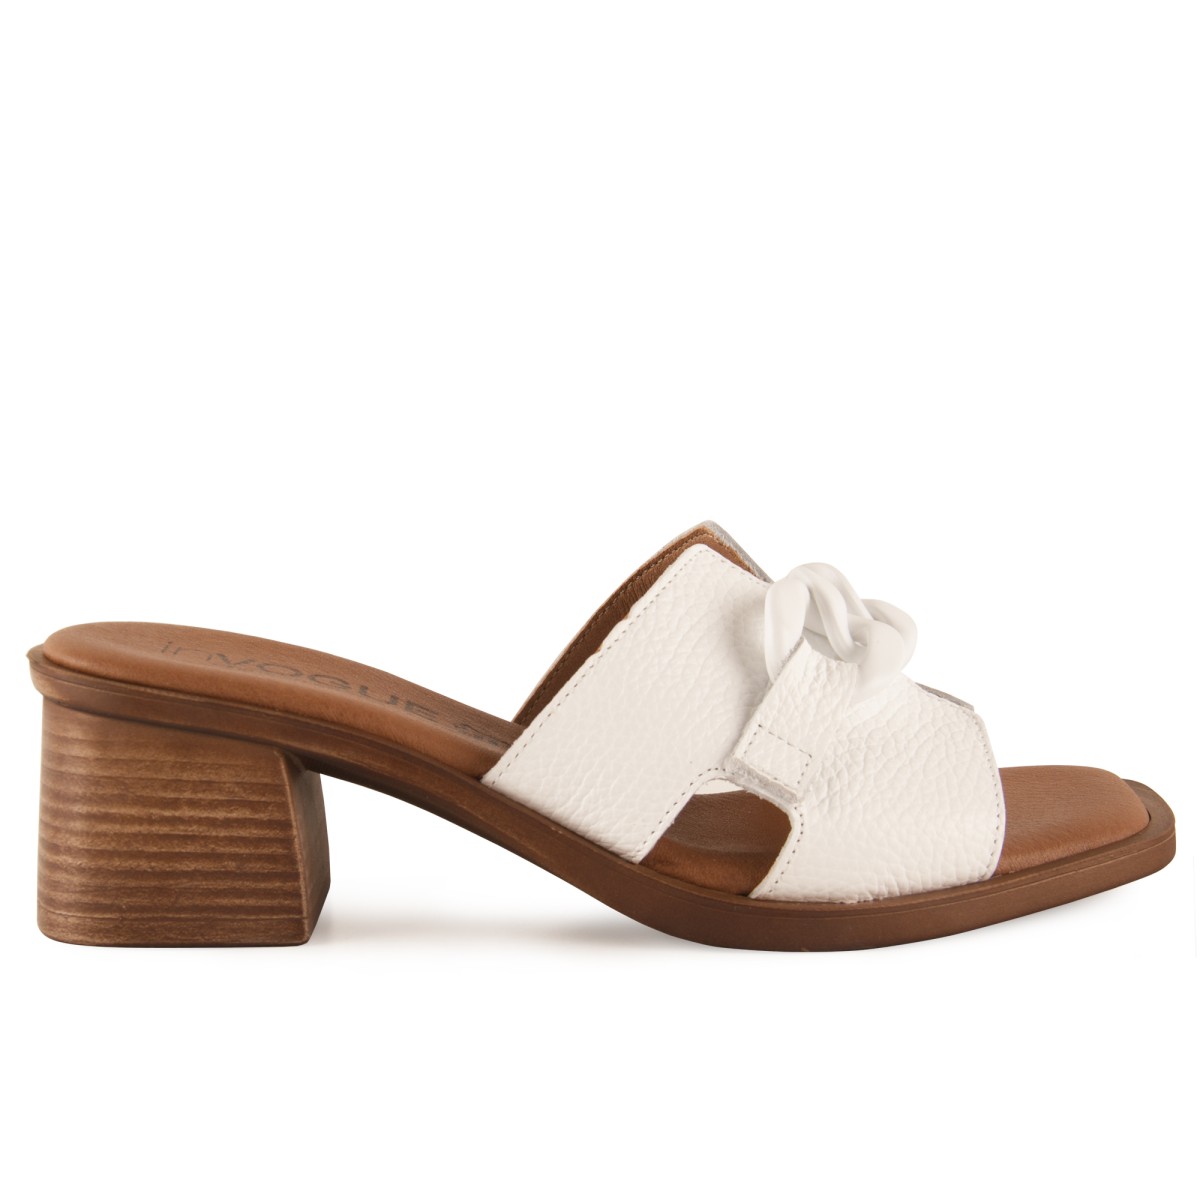 White leather sandals by Chamby